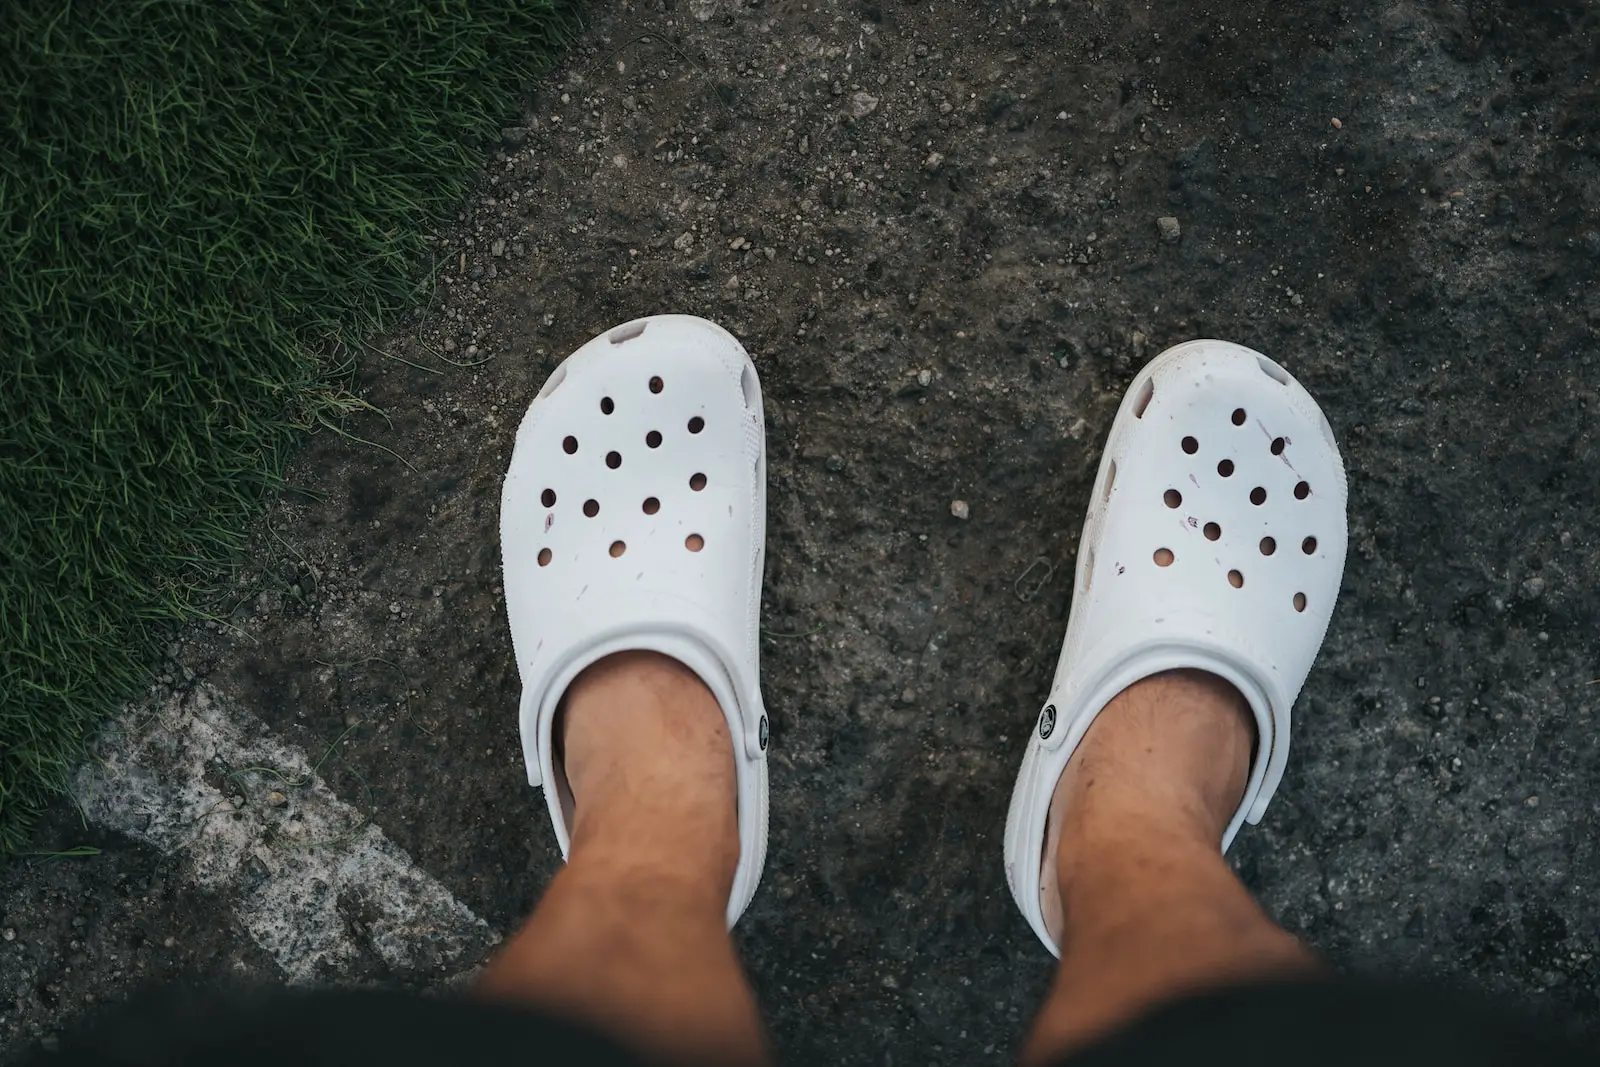 how-to-clean-crocs